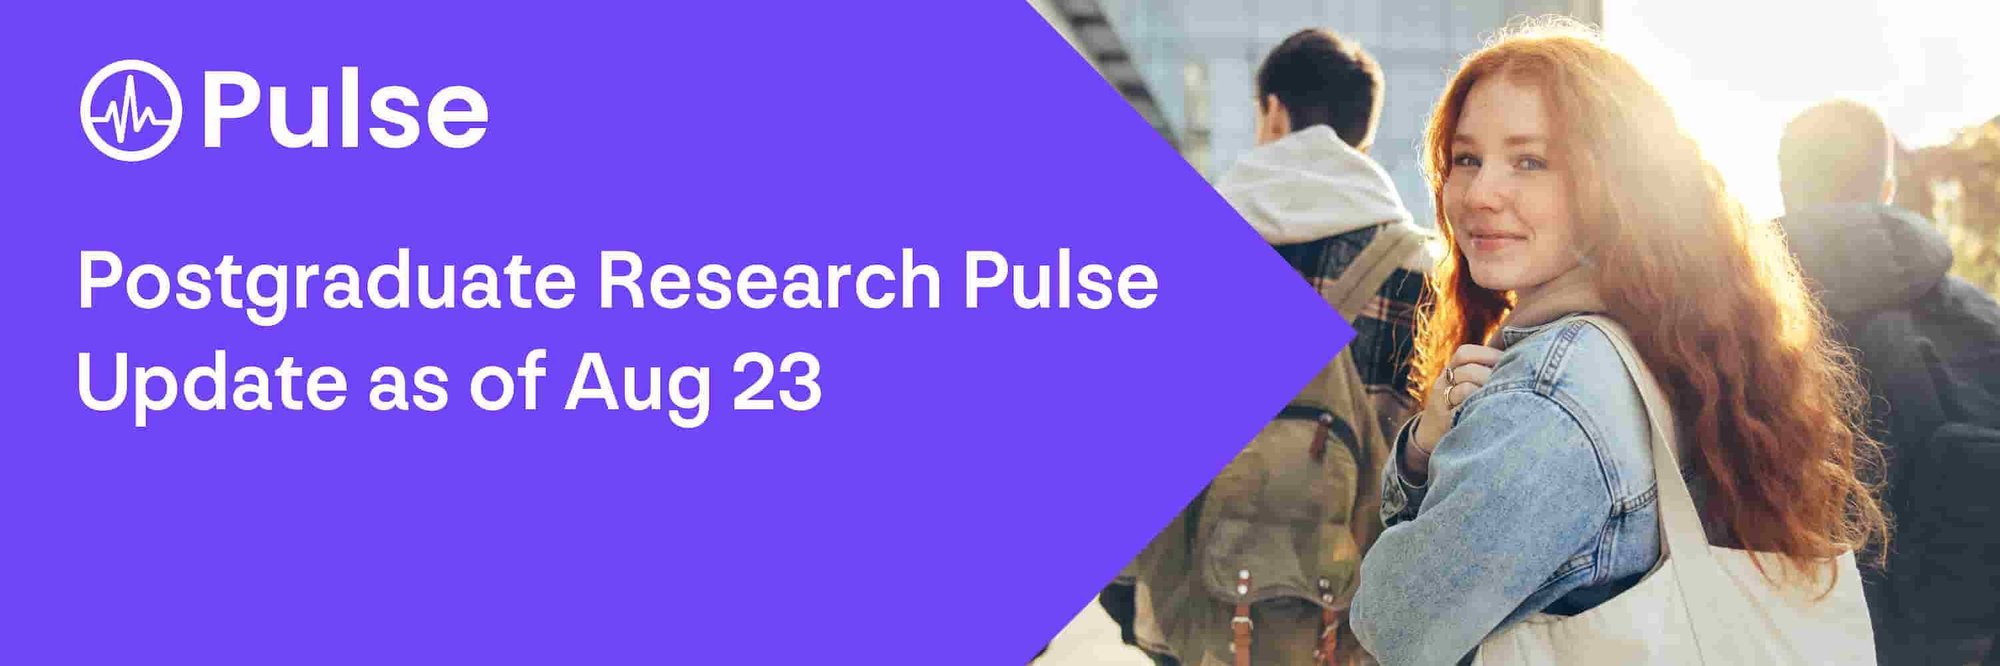 Pulse Postgraduate Research Pulse Update as of Aug 23